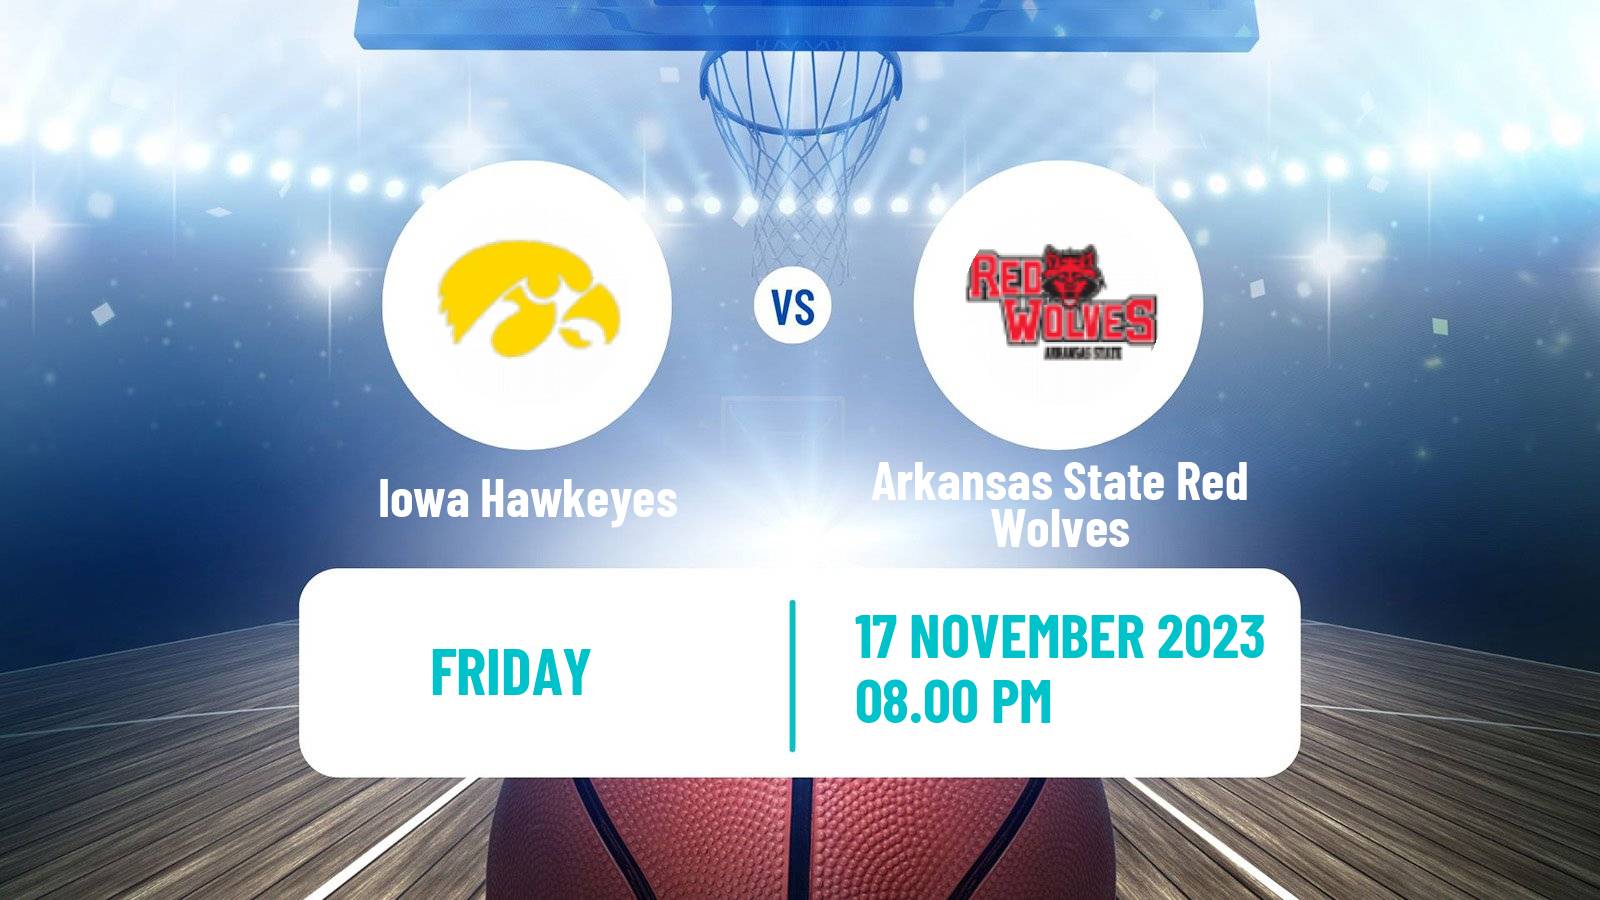 Basketball NCAA College Basketball Iowa Hawkeyes - Arkansas State Red Wolves